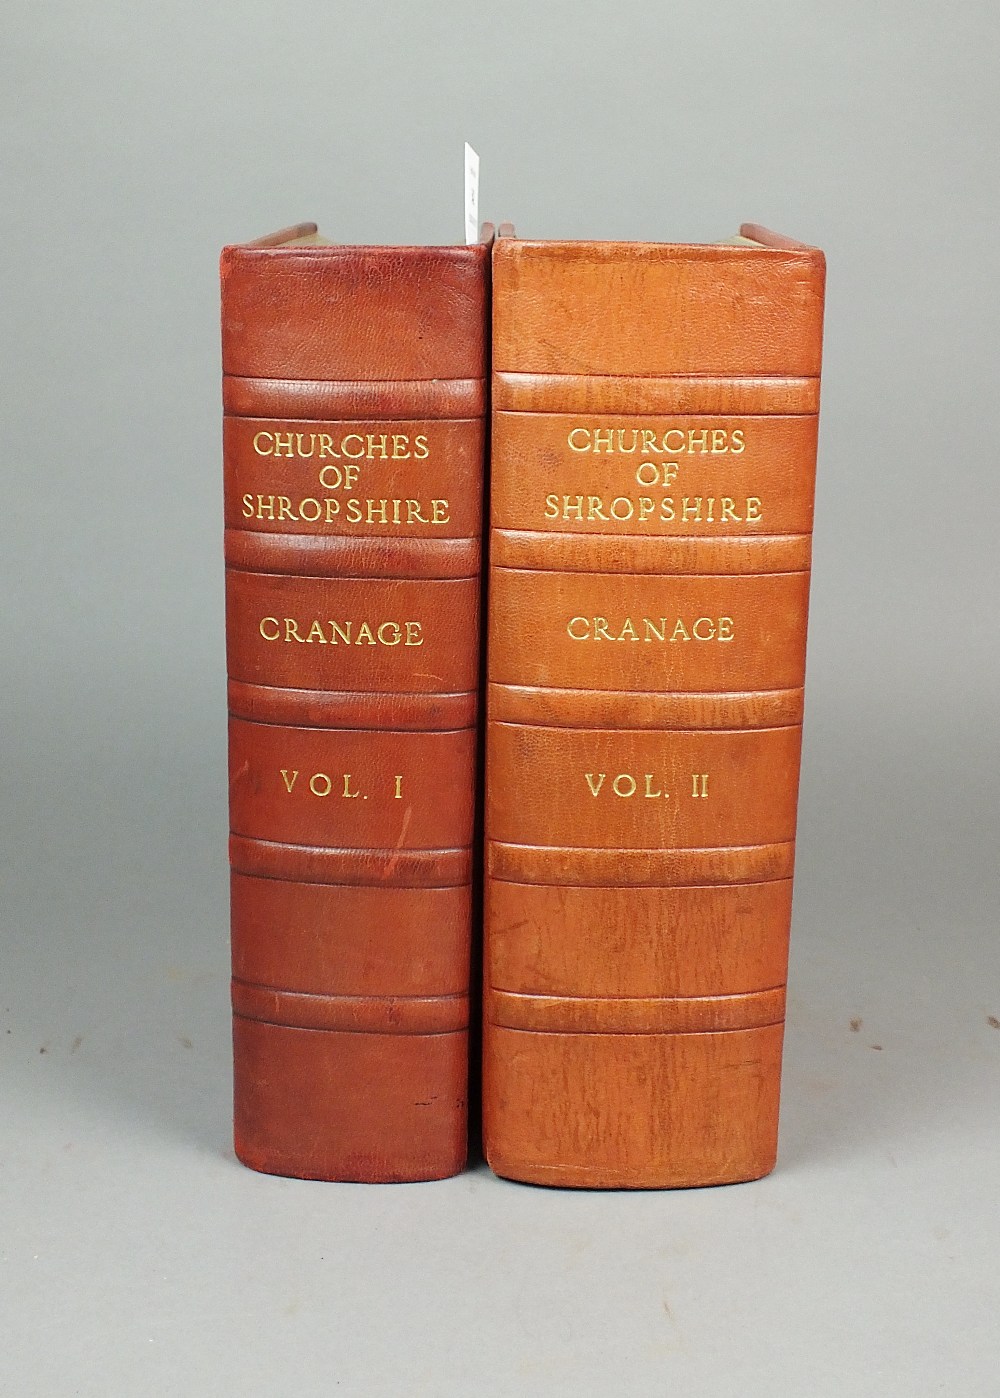 CRANAGE, DHS, An Architectural Account of the Churches of Shropshire. 4to, 2 vols 1901-12.